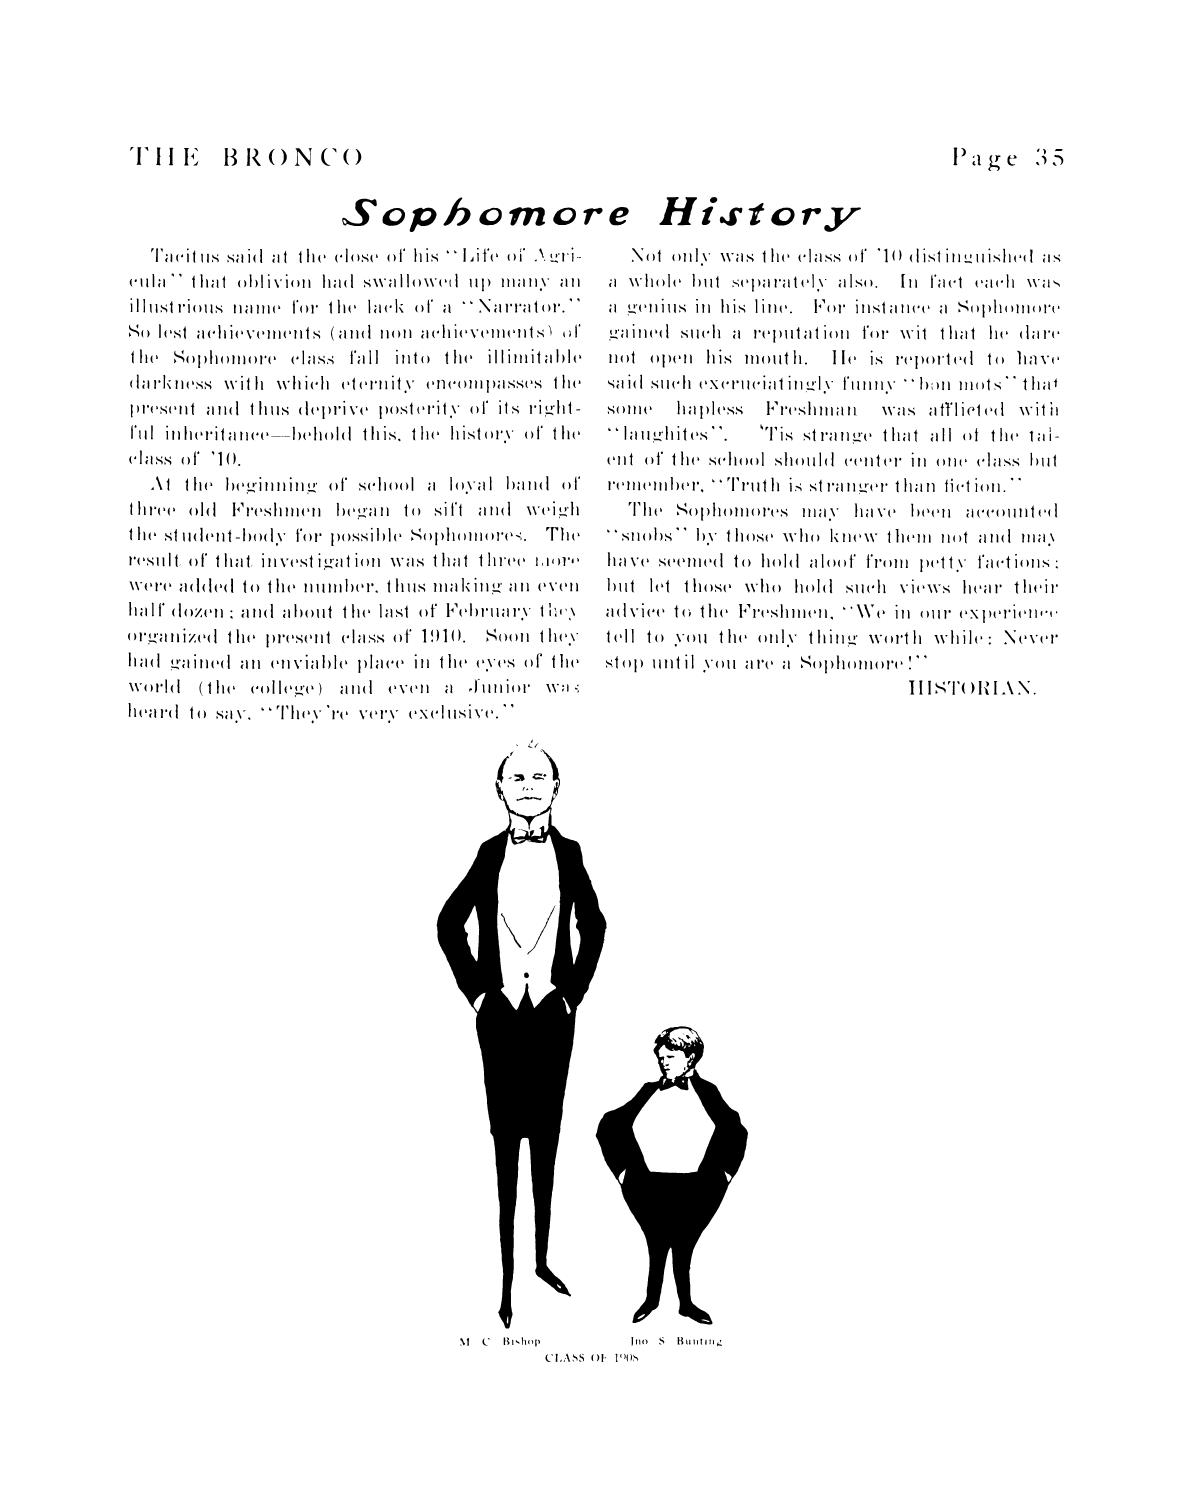 The Bronco, Yearbook of Simmons College, 1908
                                                
                                                    35
                                                